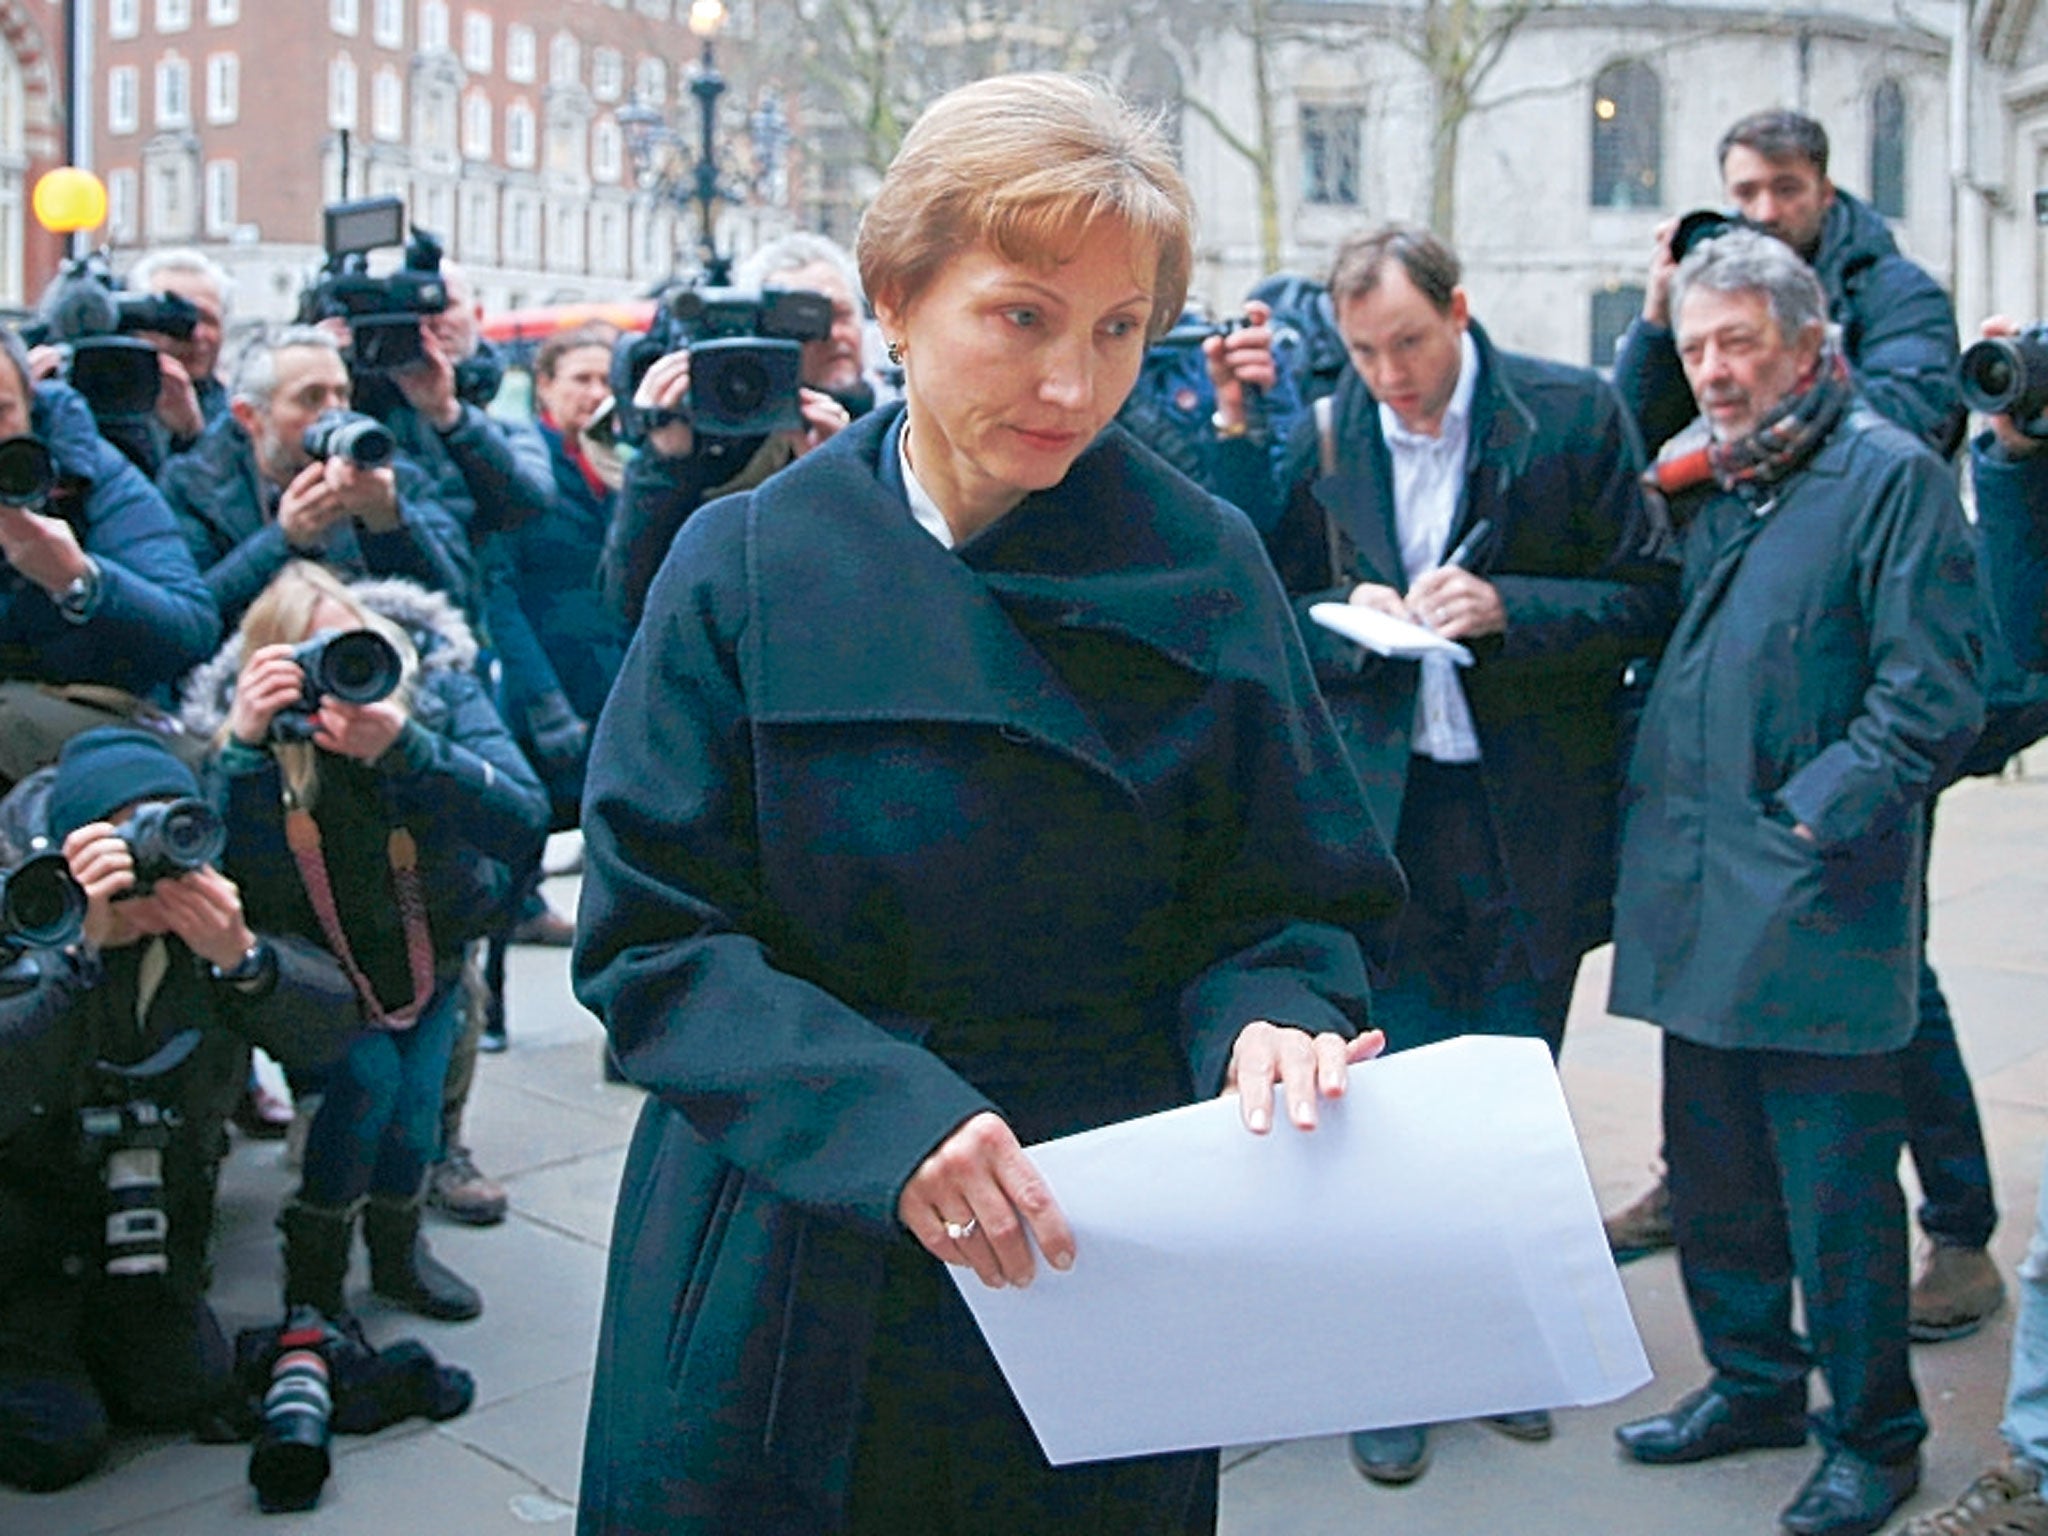 Marina Litvinenko outside the High Court in London last month, following the inquiry that concluded that Vladimir Putin was ‘probably’ behind her husband’s murder (Getty)